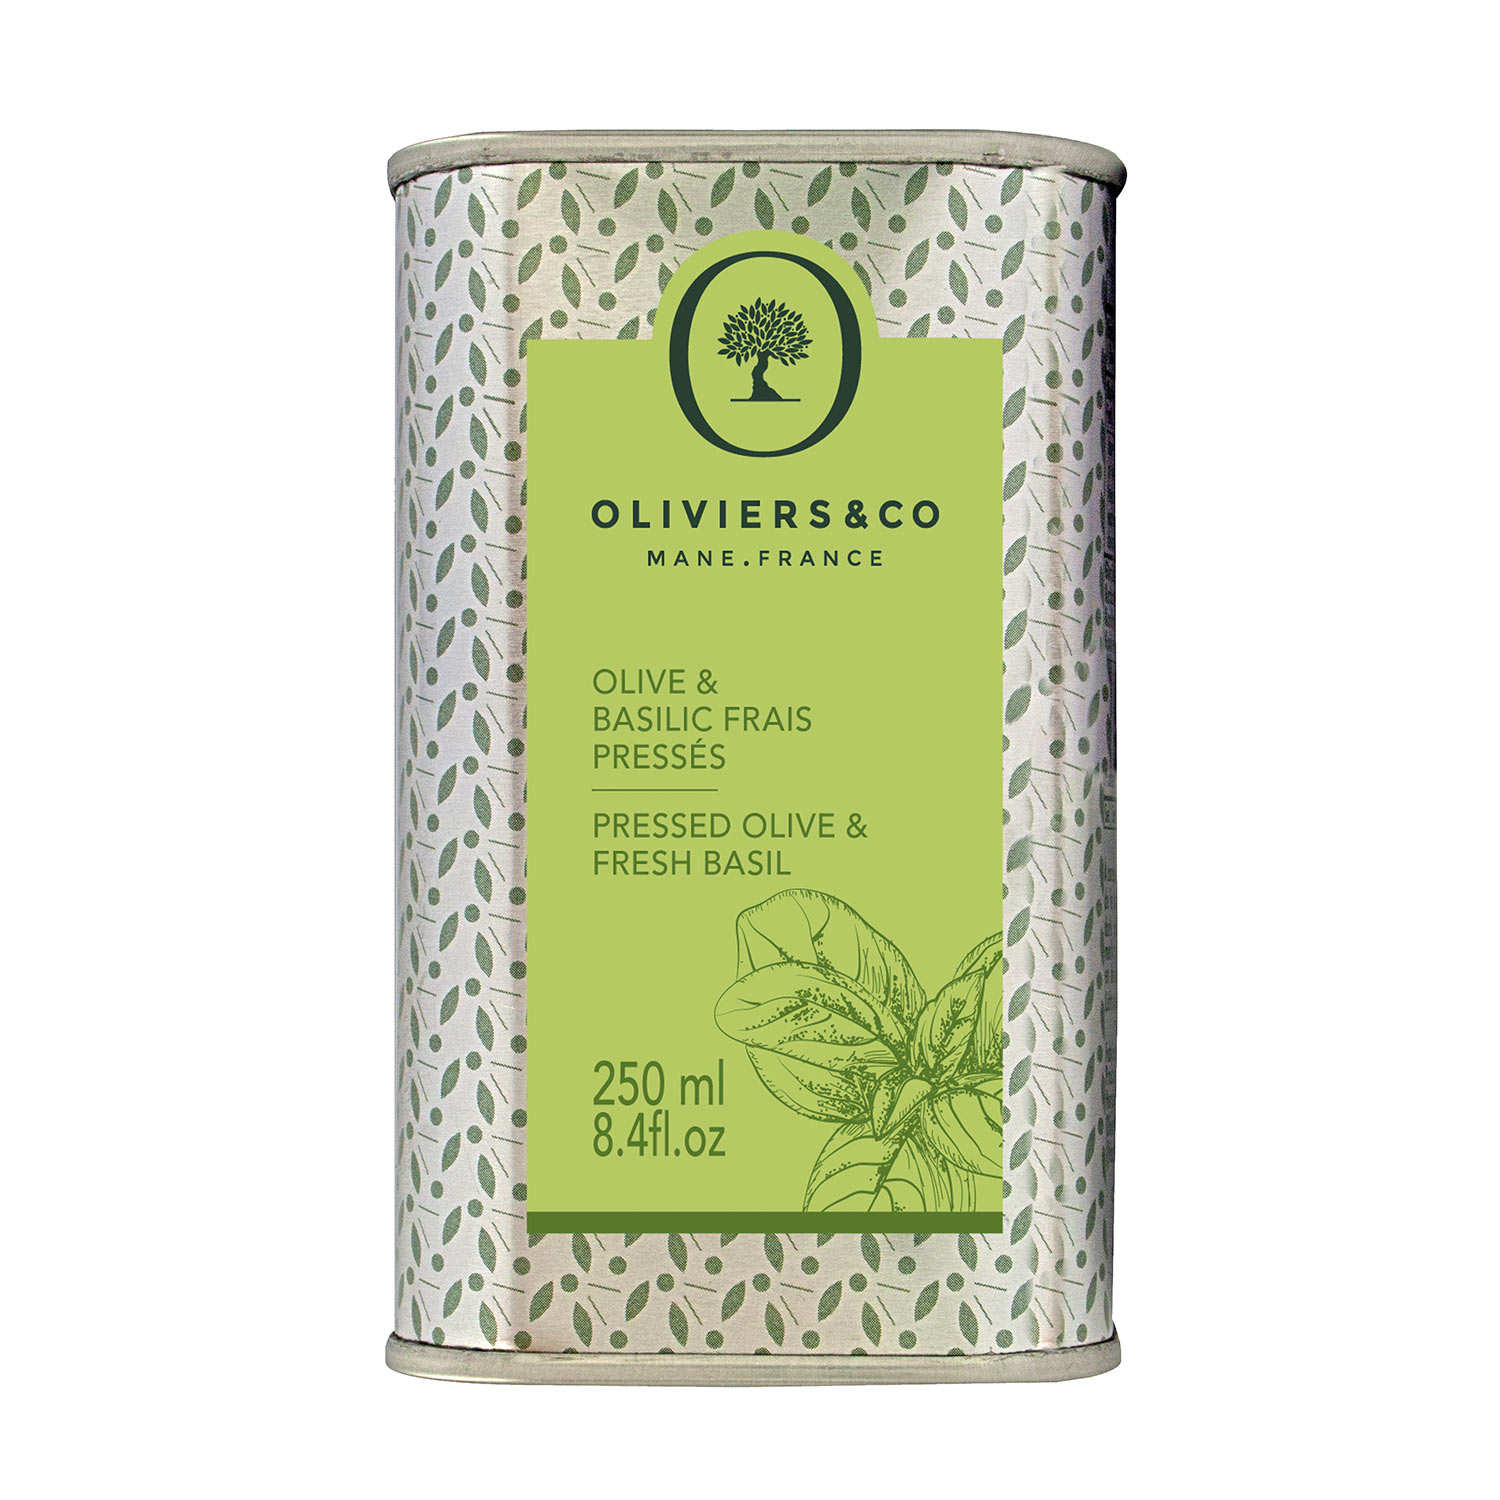 Olive oil with pressed basil - Oliviers & Co - Oliviers & Co